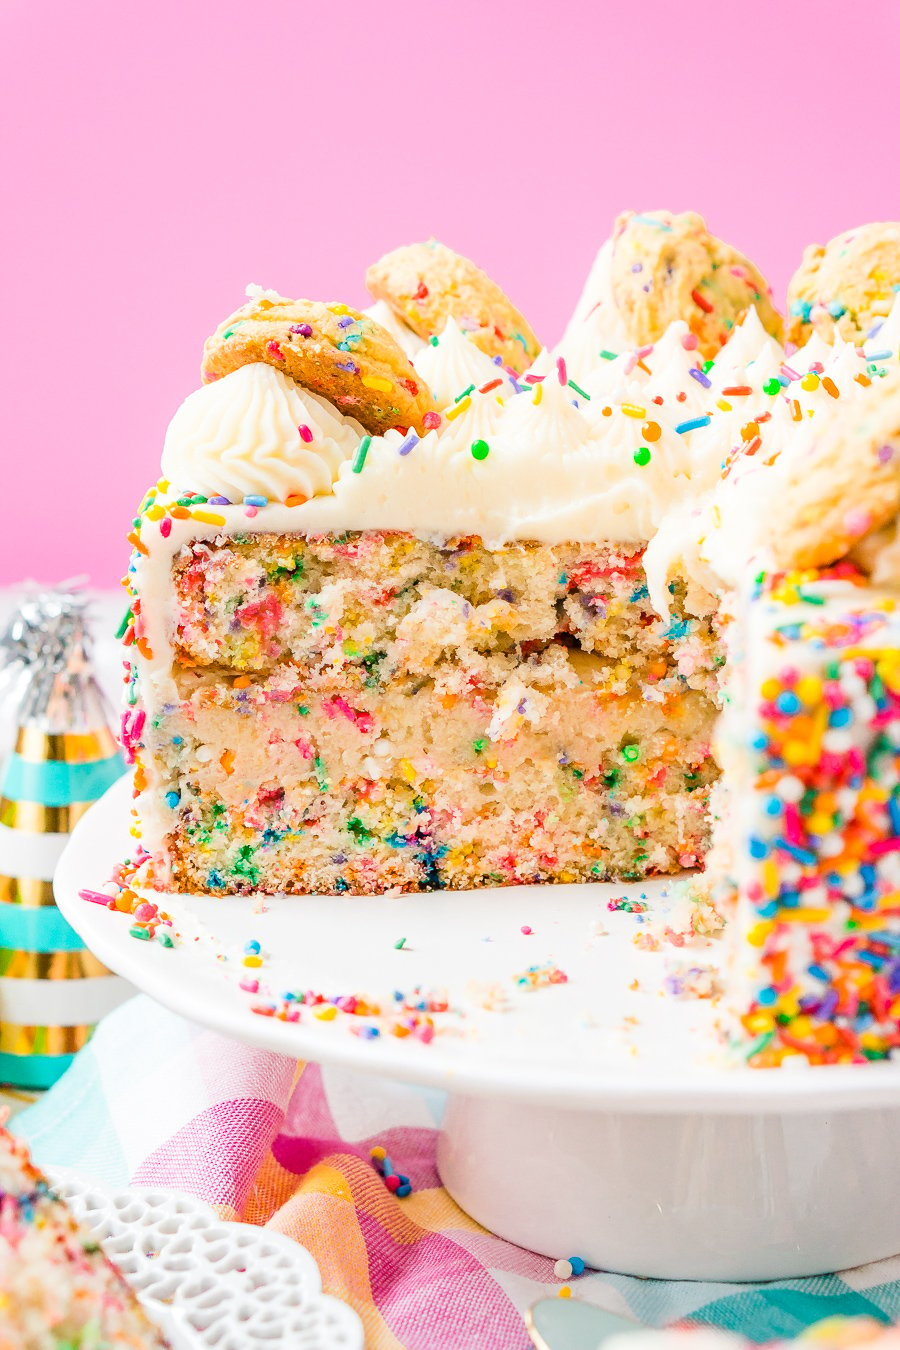 This Funfetti Sugar Cookie Dough Cake is an over the top cake made with two layers of white almond cake loaded with sprinkles and a layer of edible sugar cookie dough, then topped with classic vanilla buttercream!